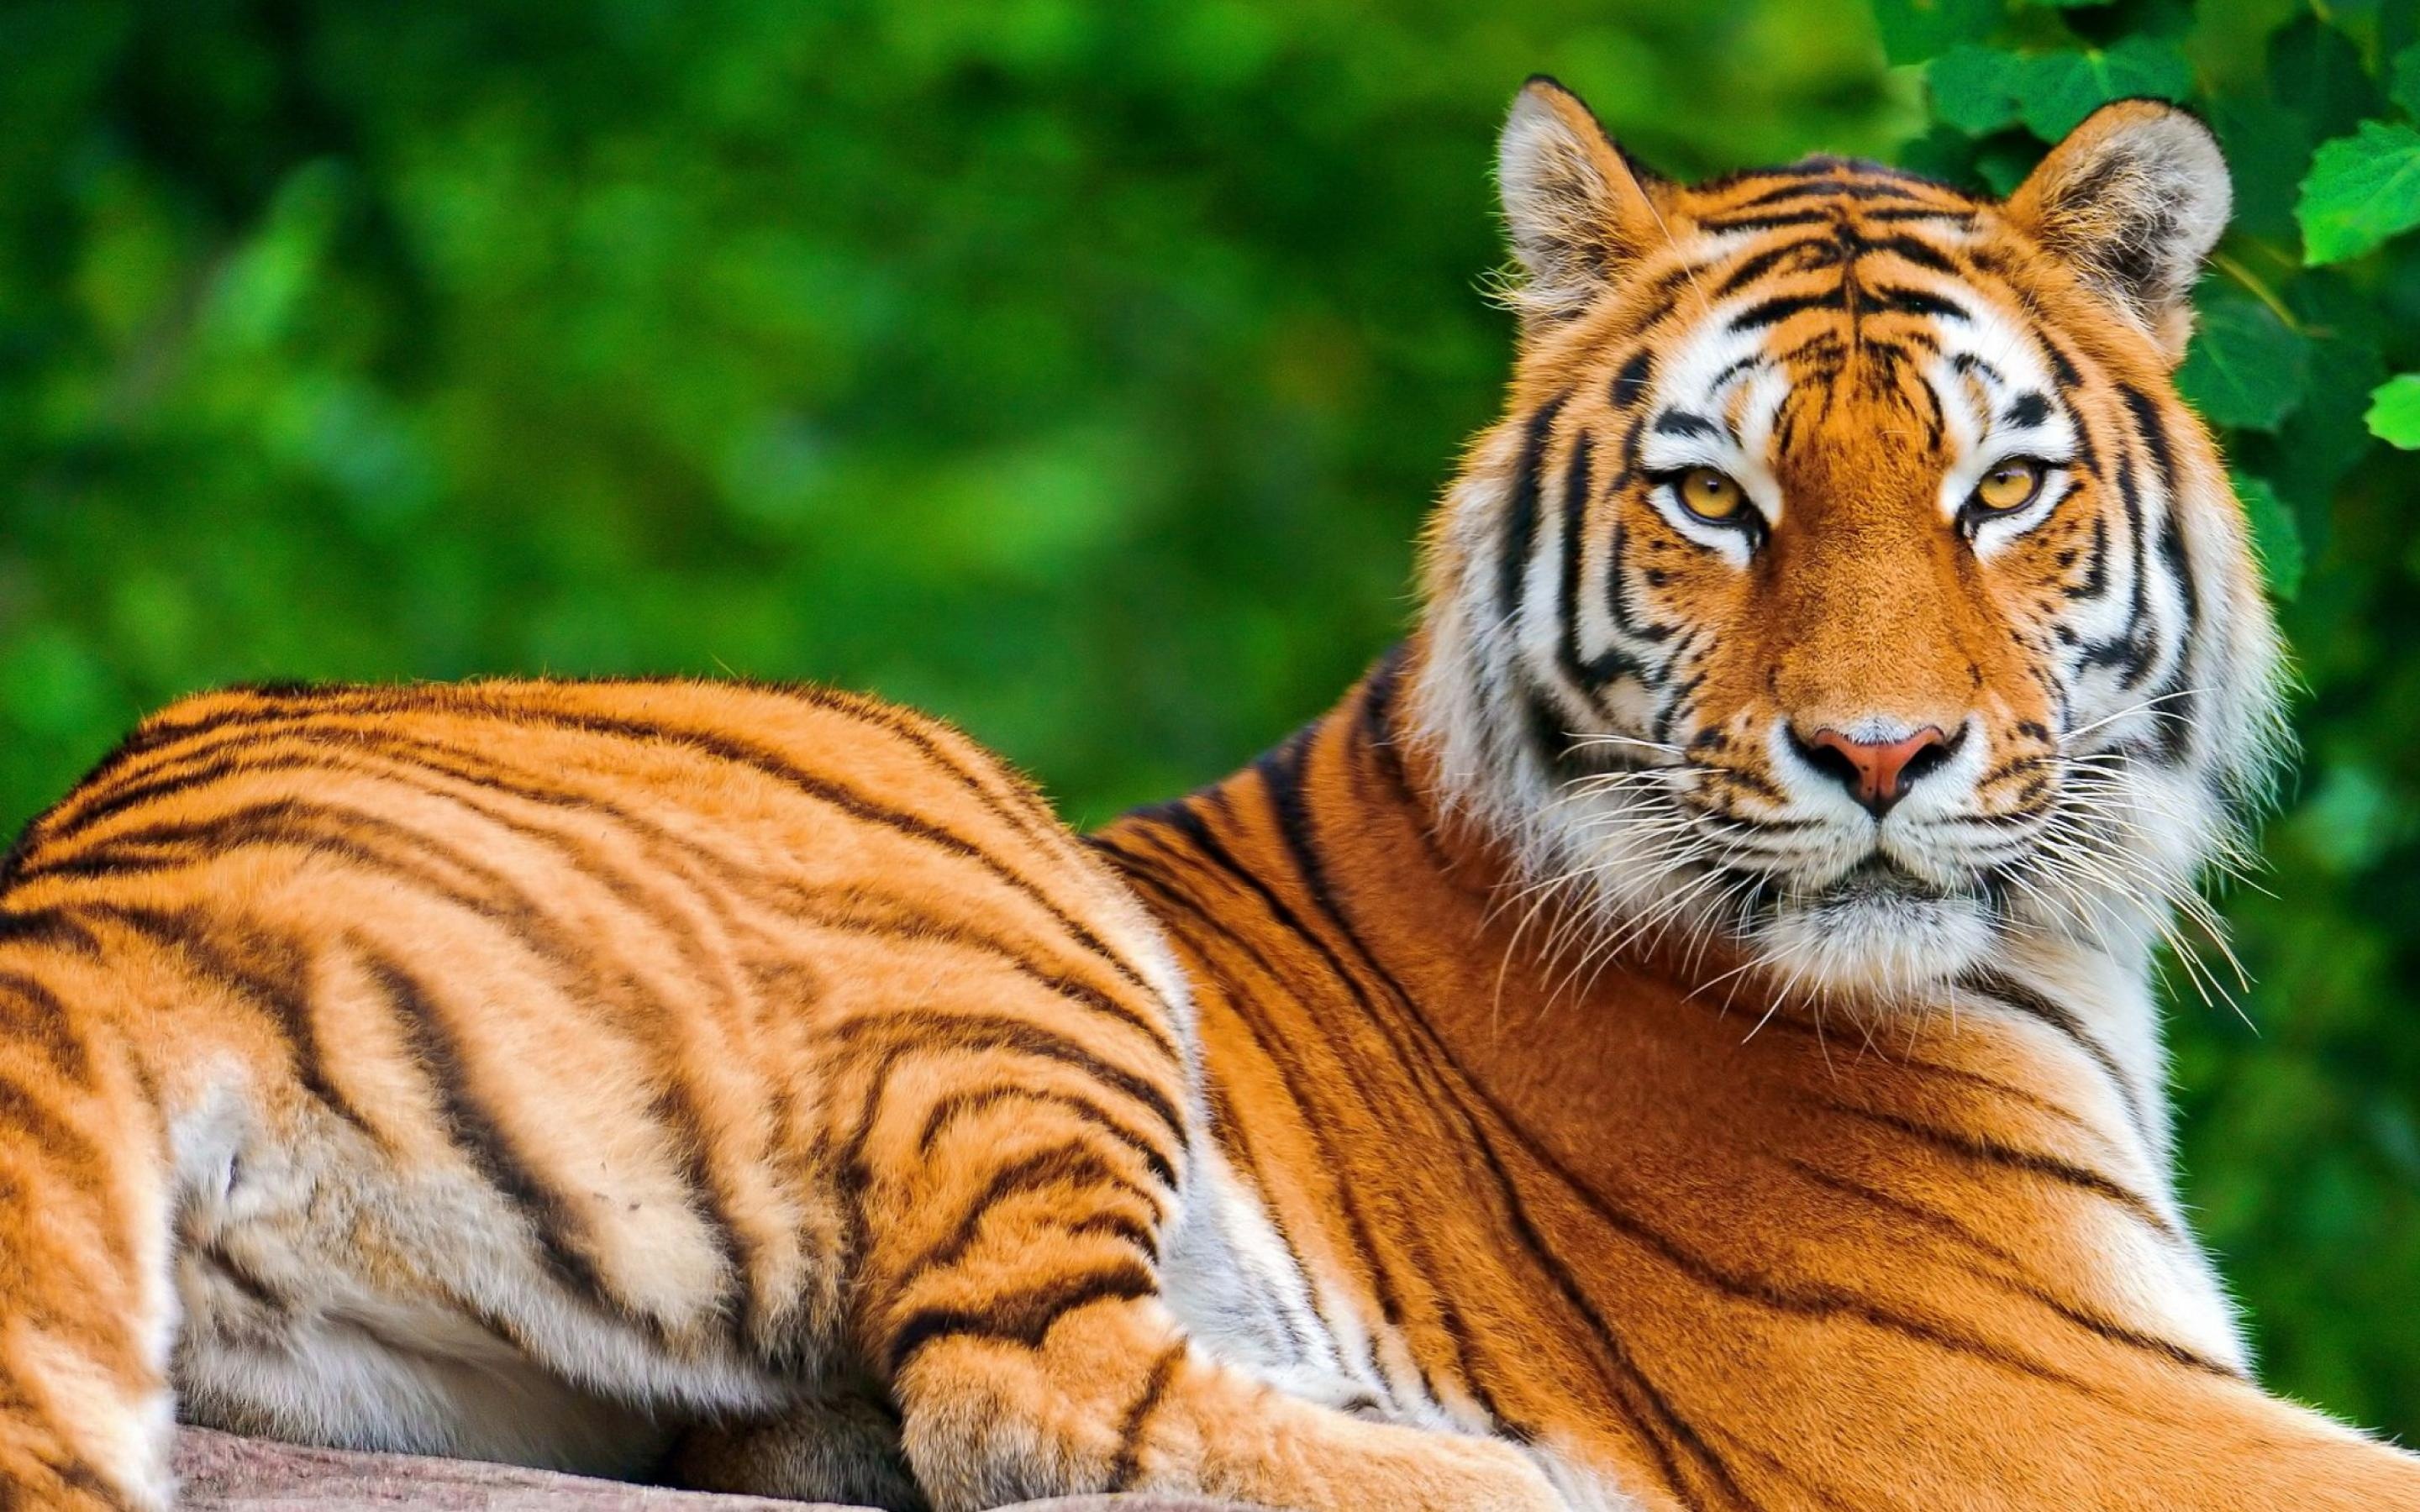 tiger wallpapers in hd #23